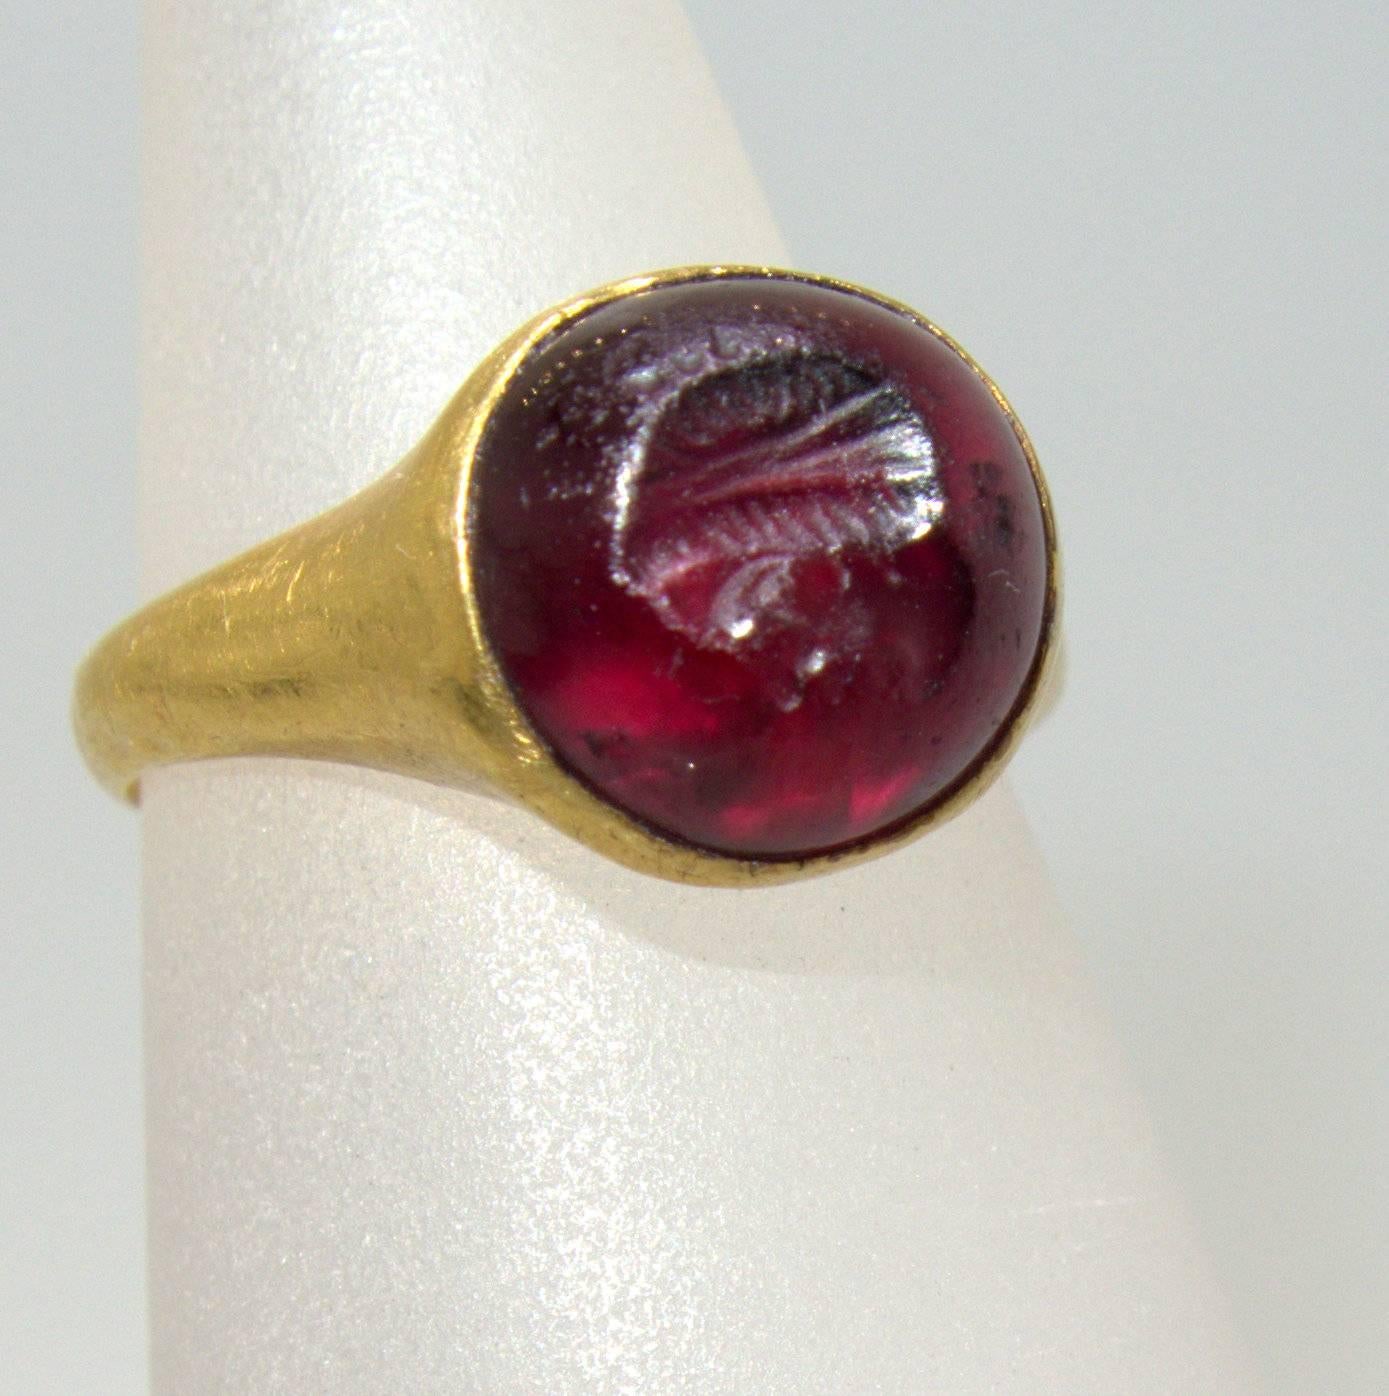 Roman, 1st century, this ring which is a very high content of gold (22k), holds a intaglio ruby of a head or mask.  Accompanying this superb example of ancient jewelry in fine condition is a document describing and dating the piece from an expert in